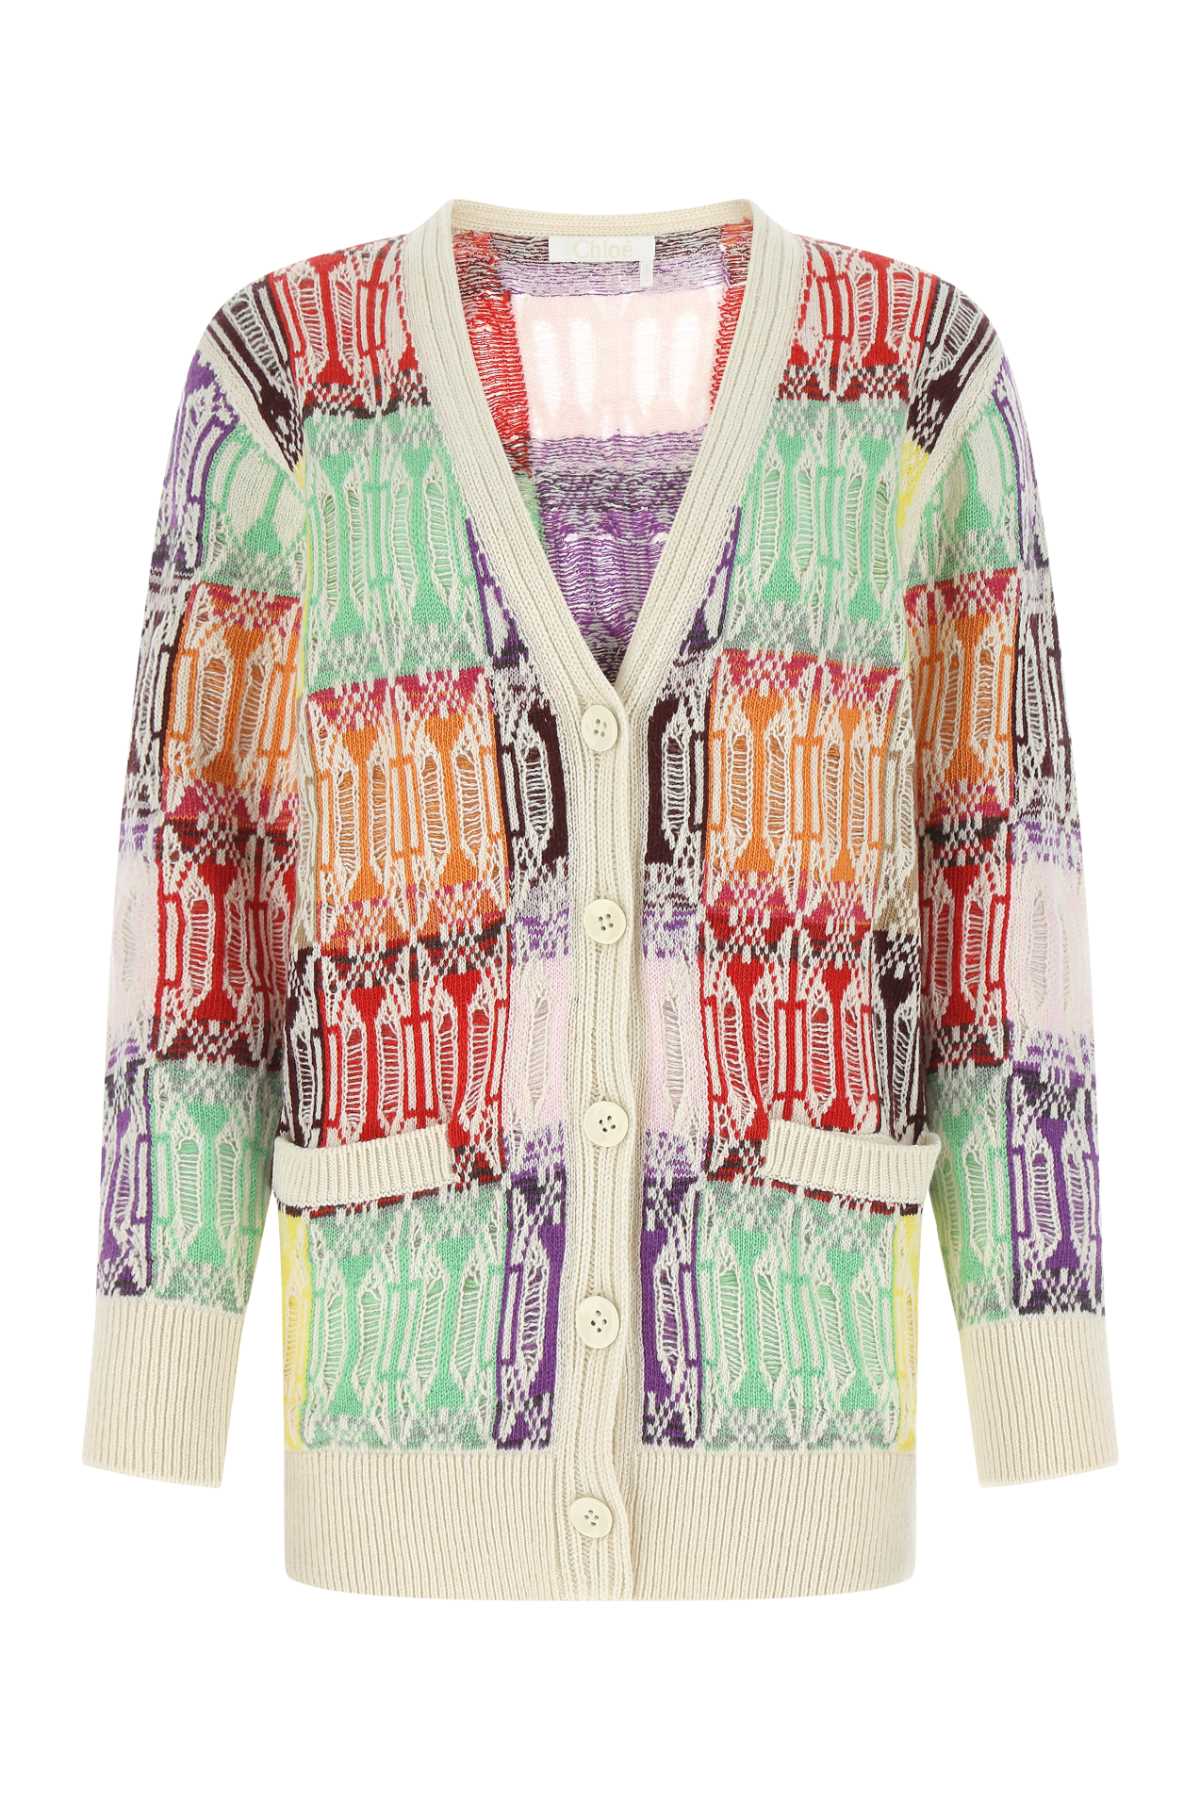 Chloé Embroidered Cashmere Blend Cardigan